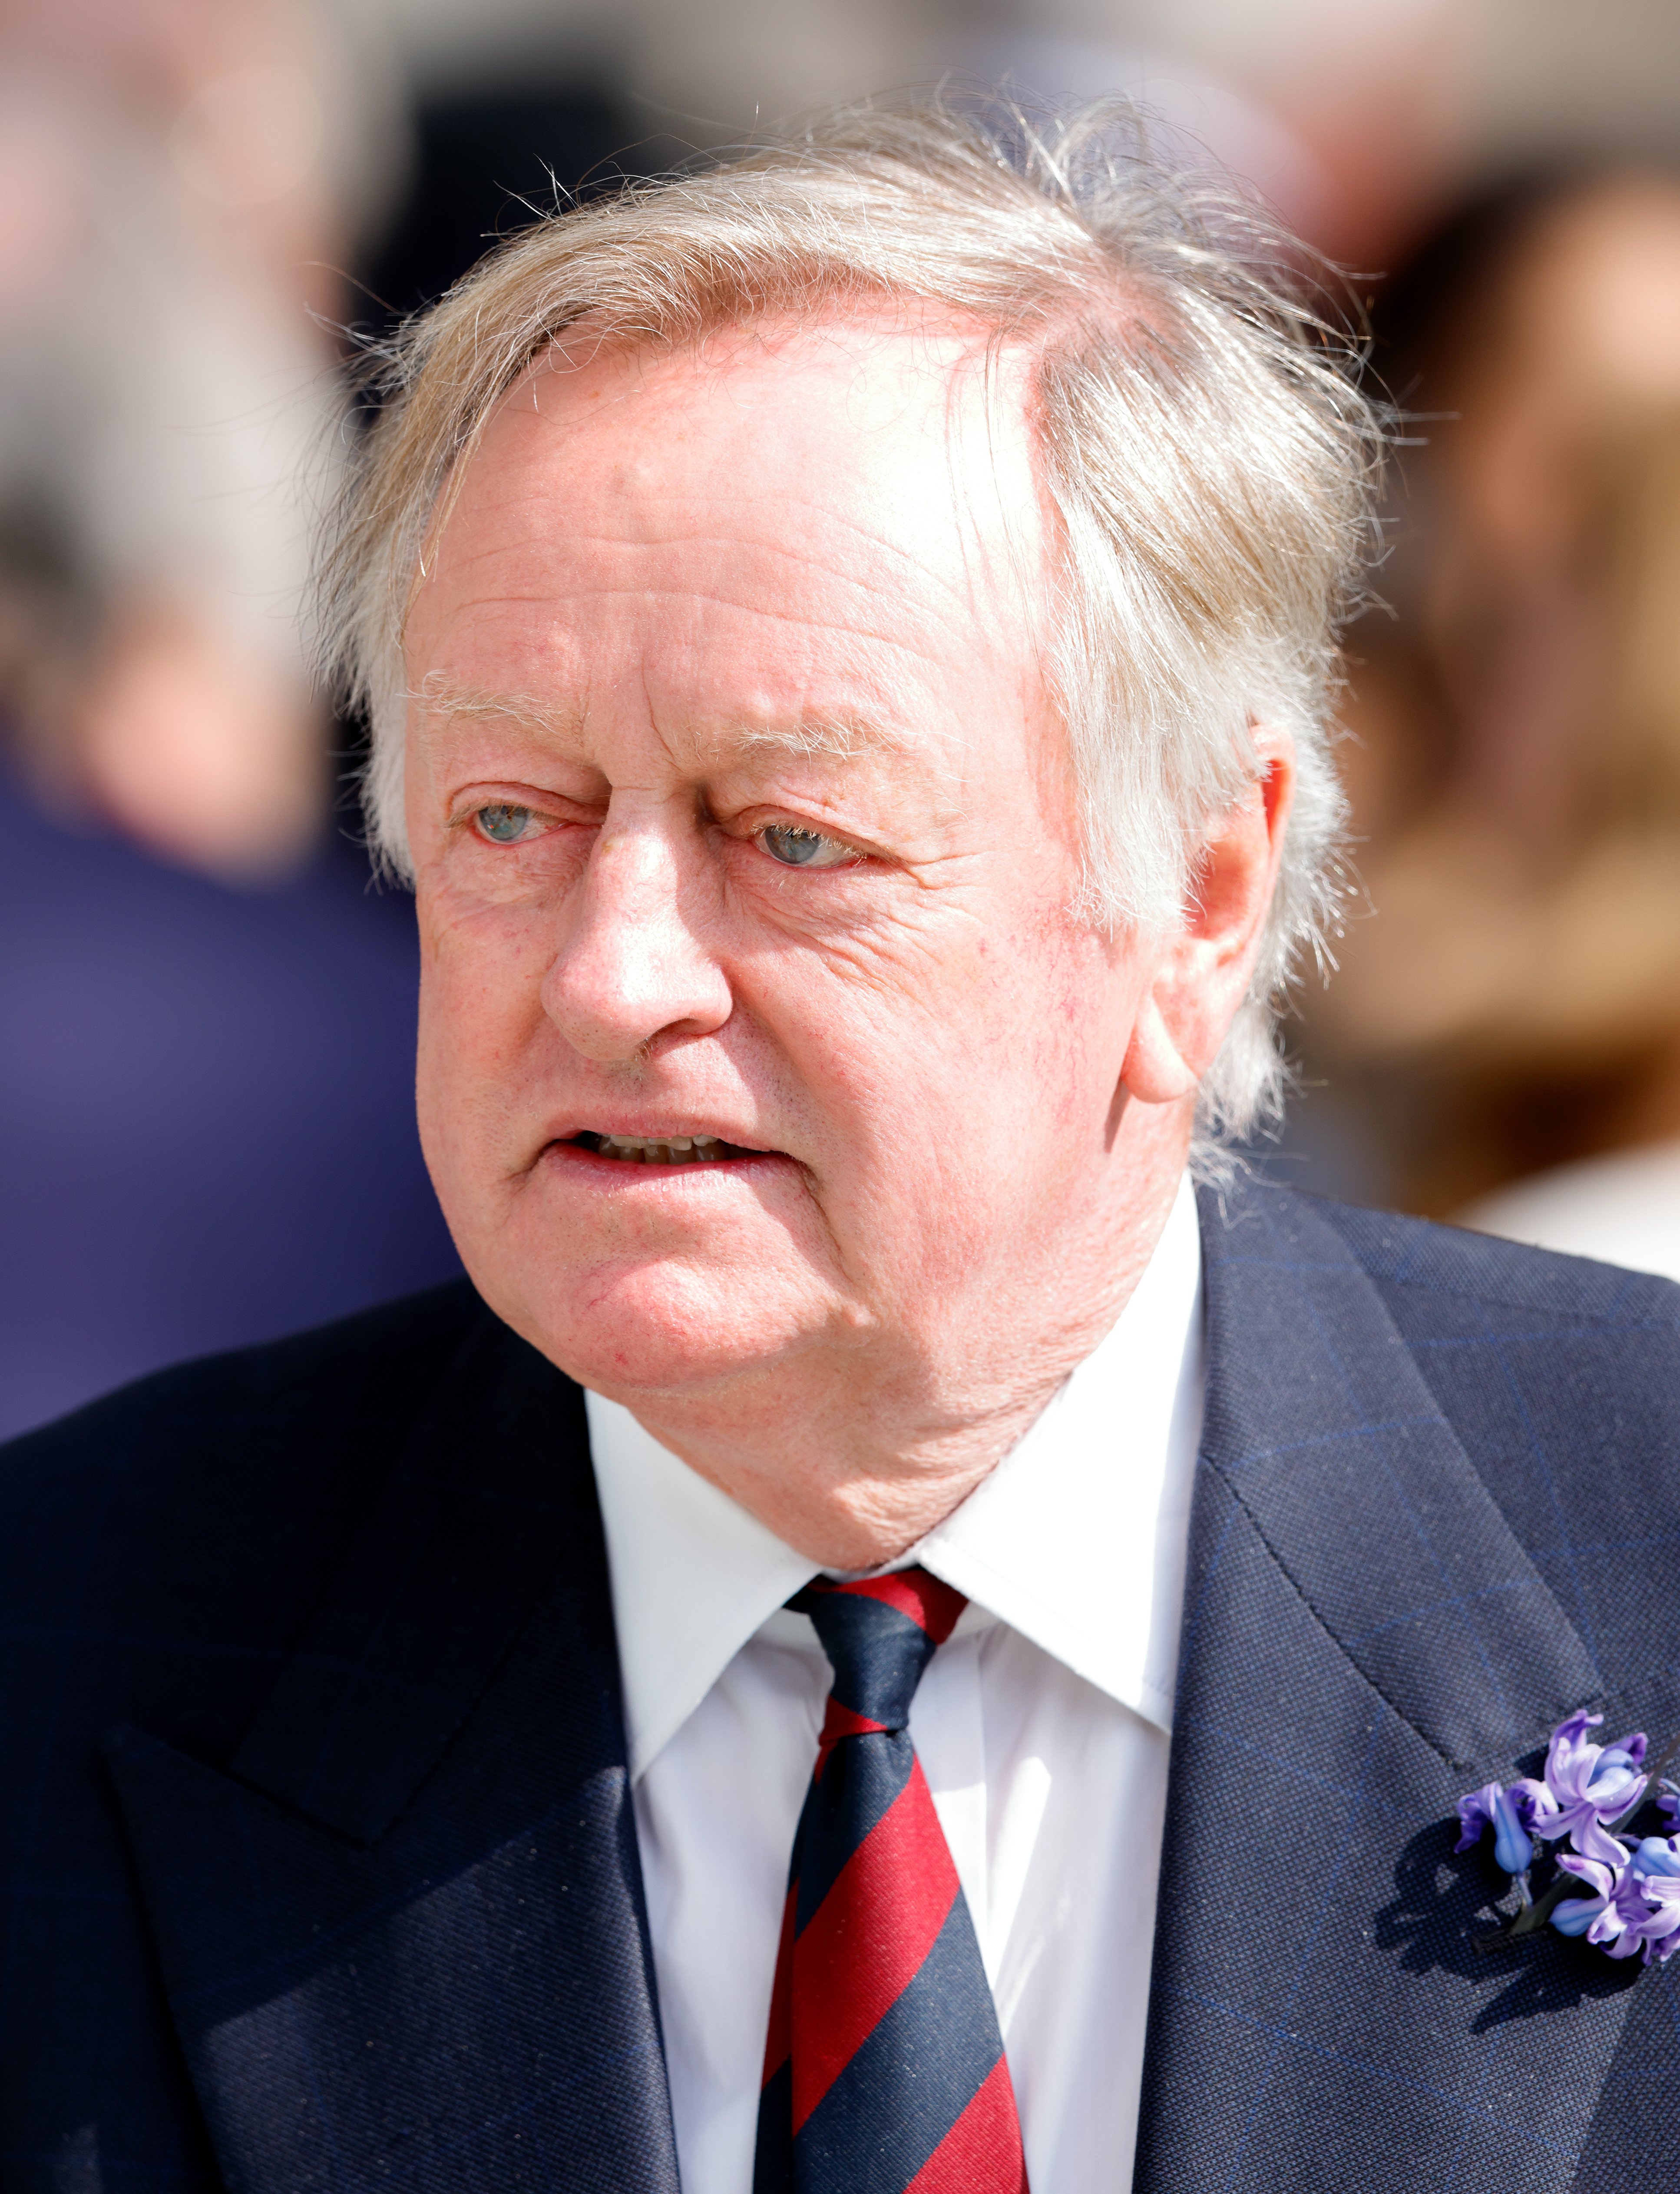 Andrew Parker Bowles attends a memorial service for Sir Michael Oswald at St Clement Danes Church on March 25, 2022, in London, England. | Source: Getty Images